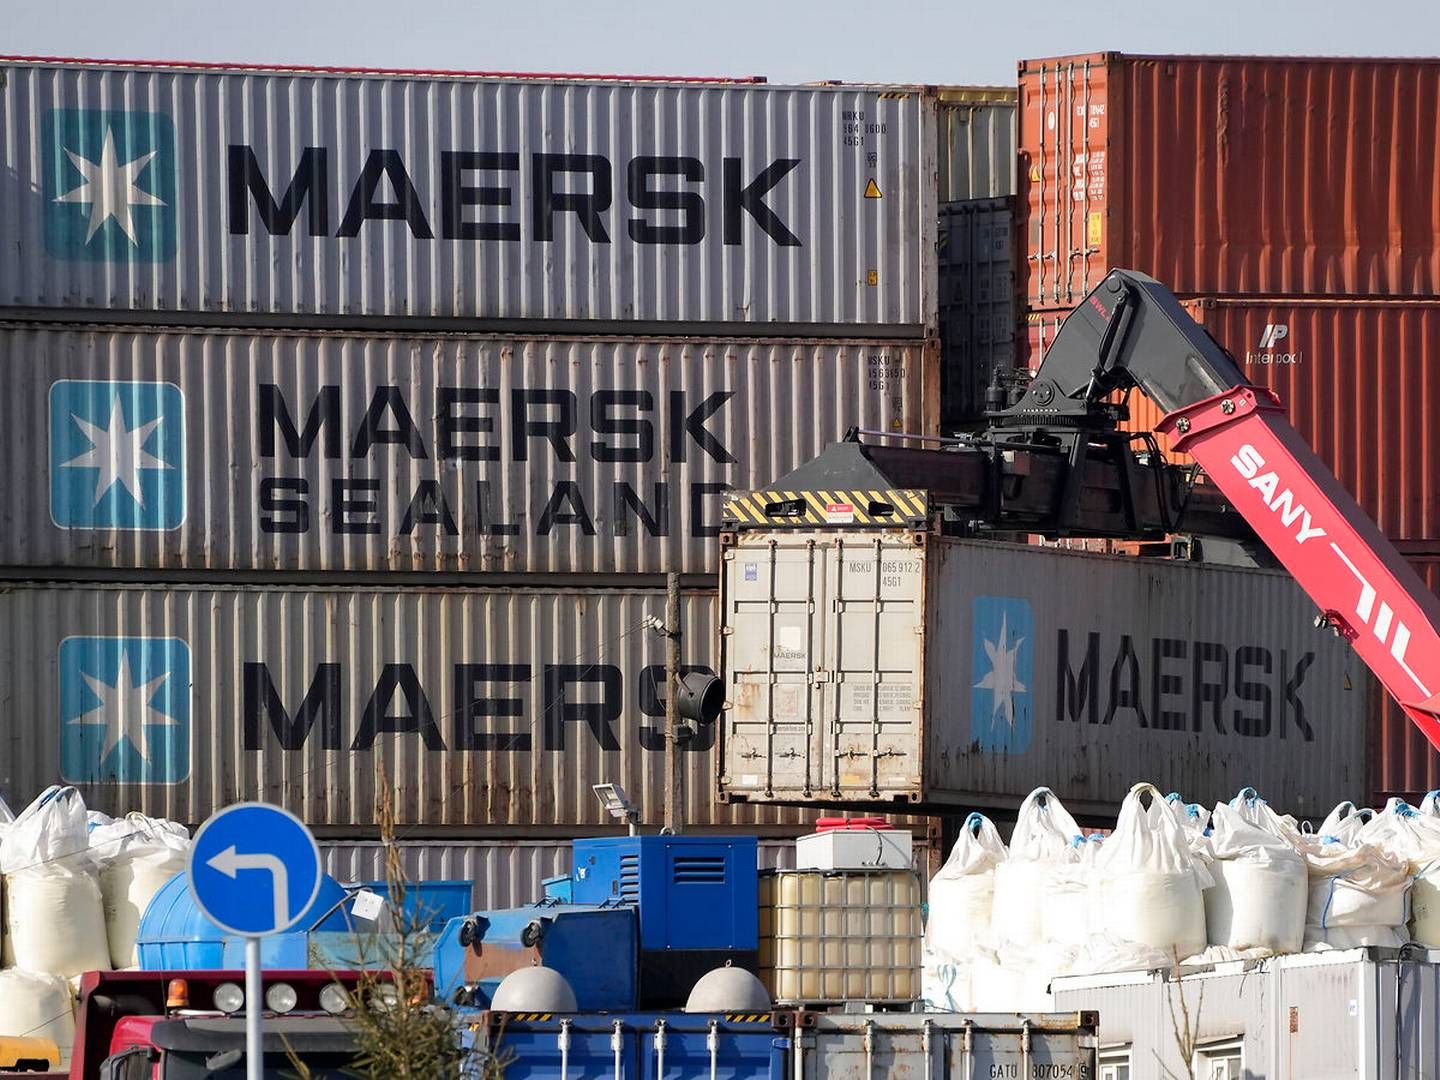 Maersk has given up bringing 20,000 containers out of Russia. Here, in the container terminal in St. Petersburg. | Photo: Uncredited/AP/Ritzau Scanpix